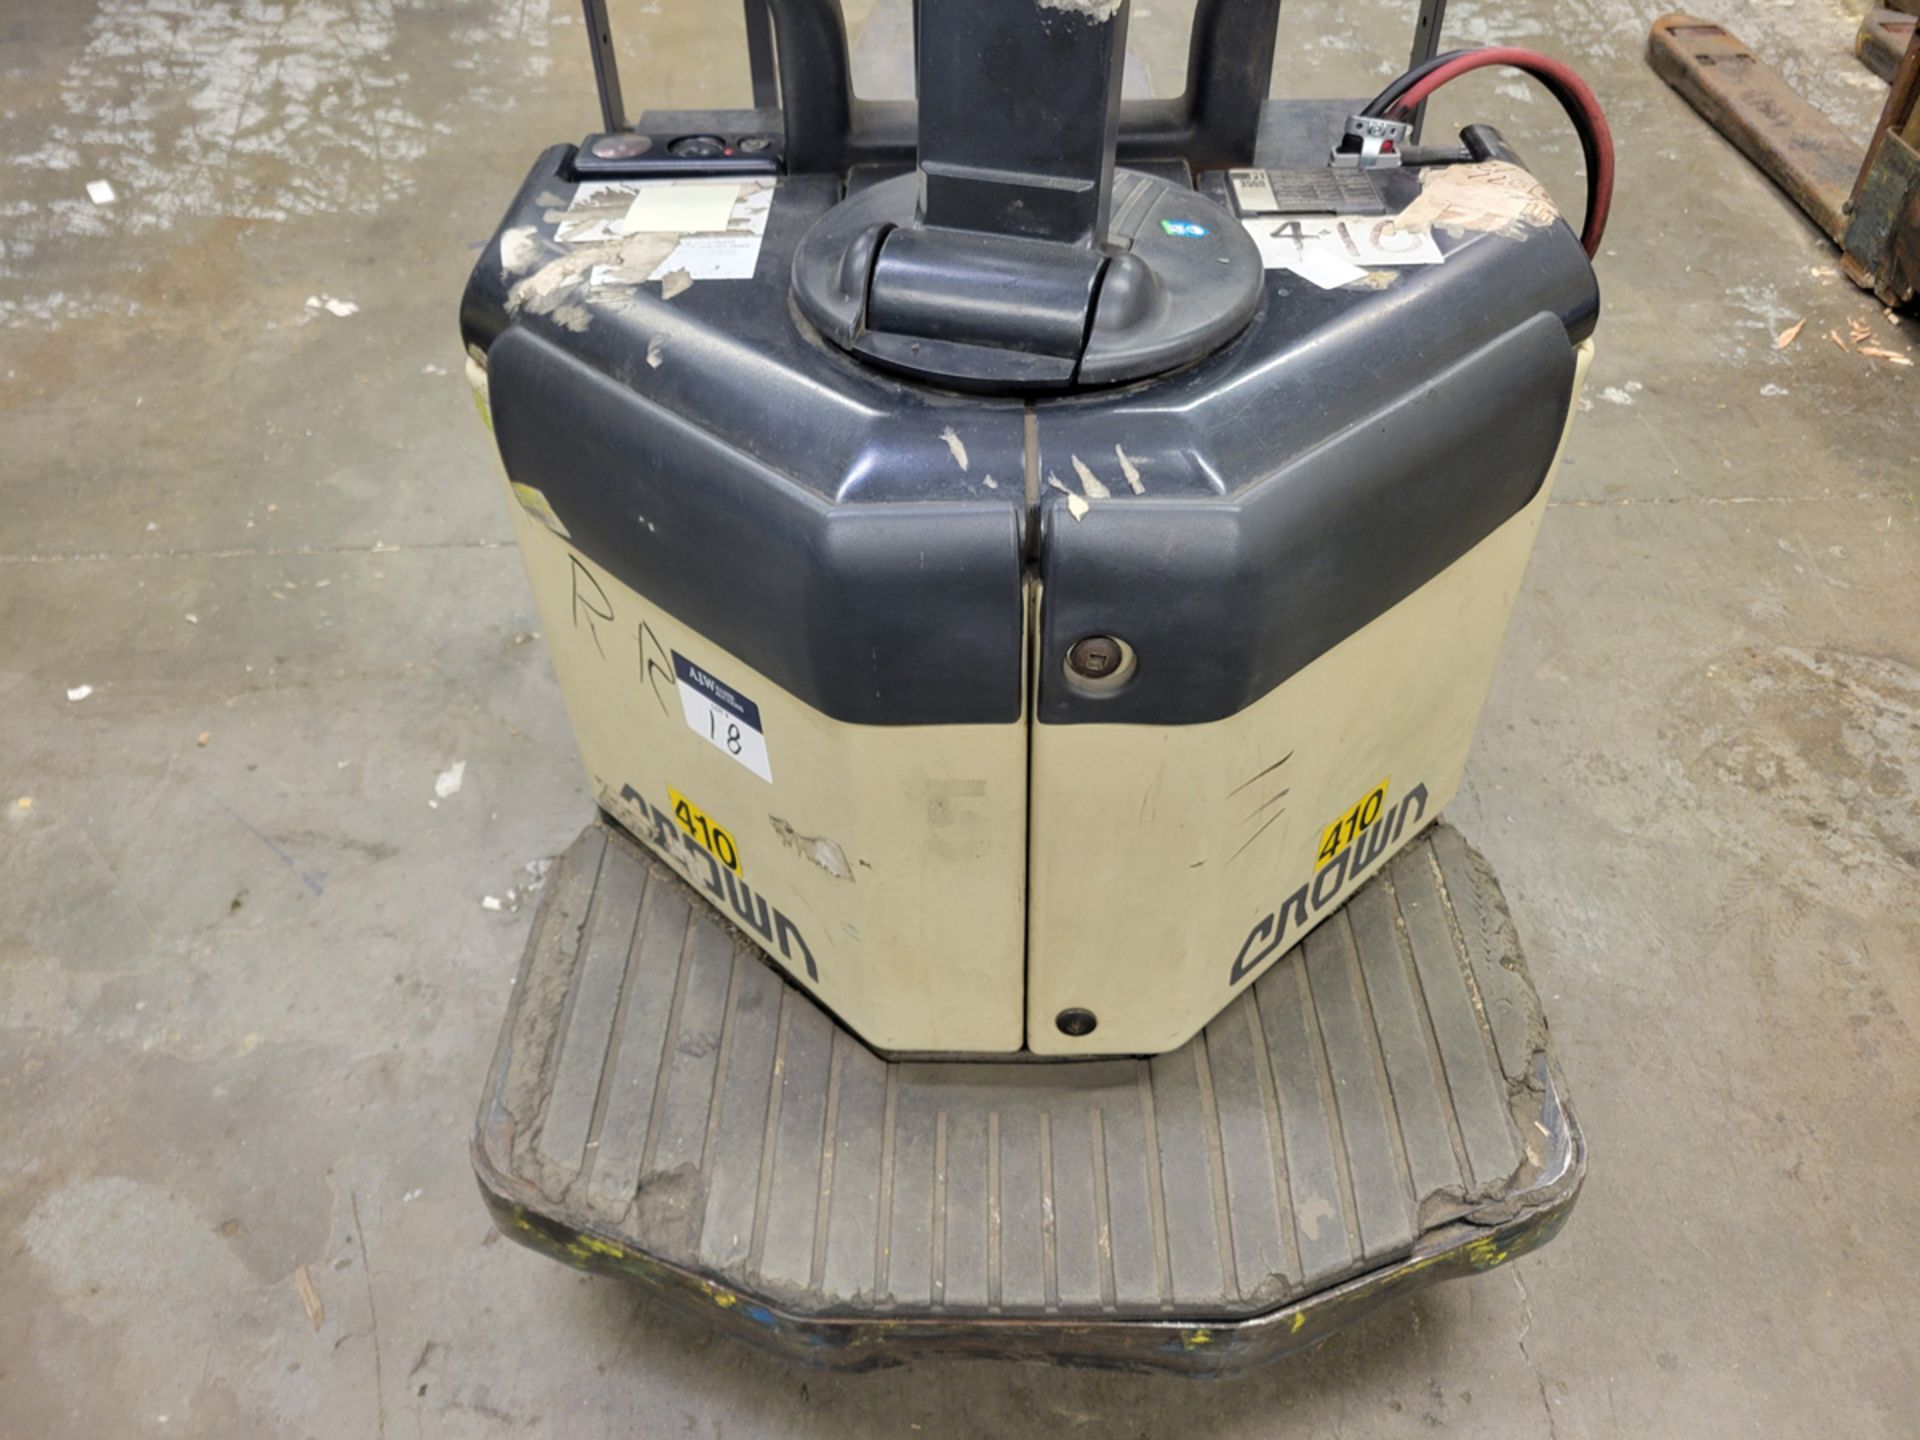 Crown PE3540-80 8,000lbs Electric 24V Rider Pallet Jack w/ Charger - Image 5 of 10